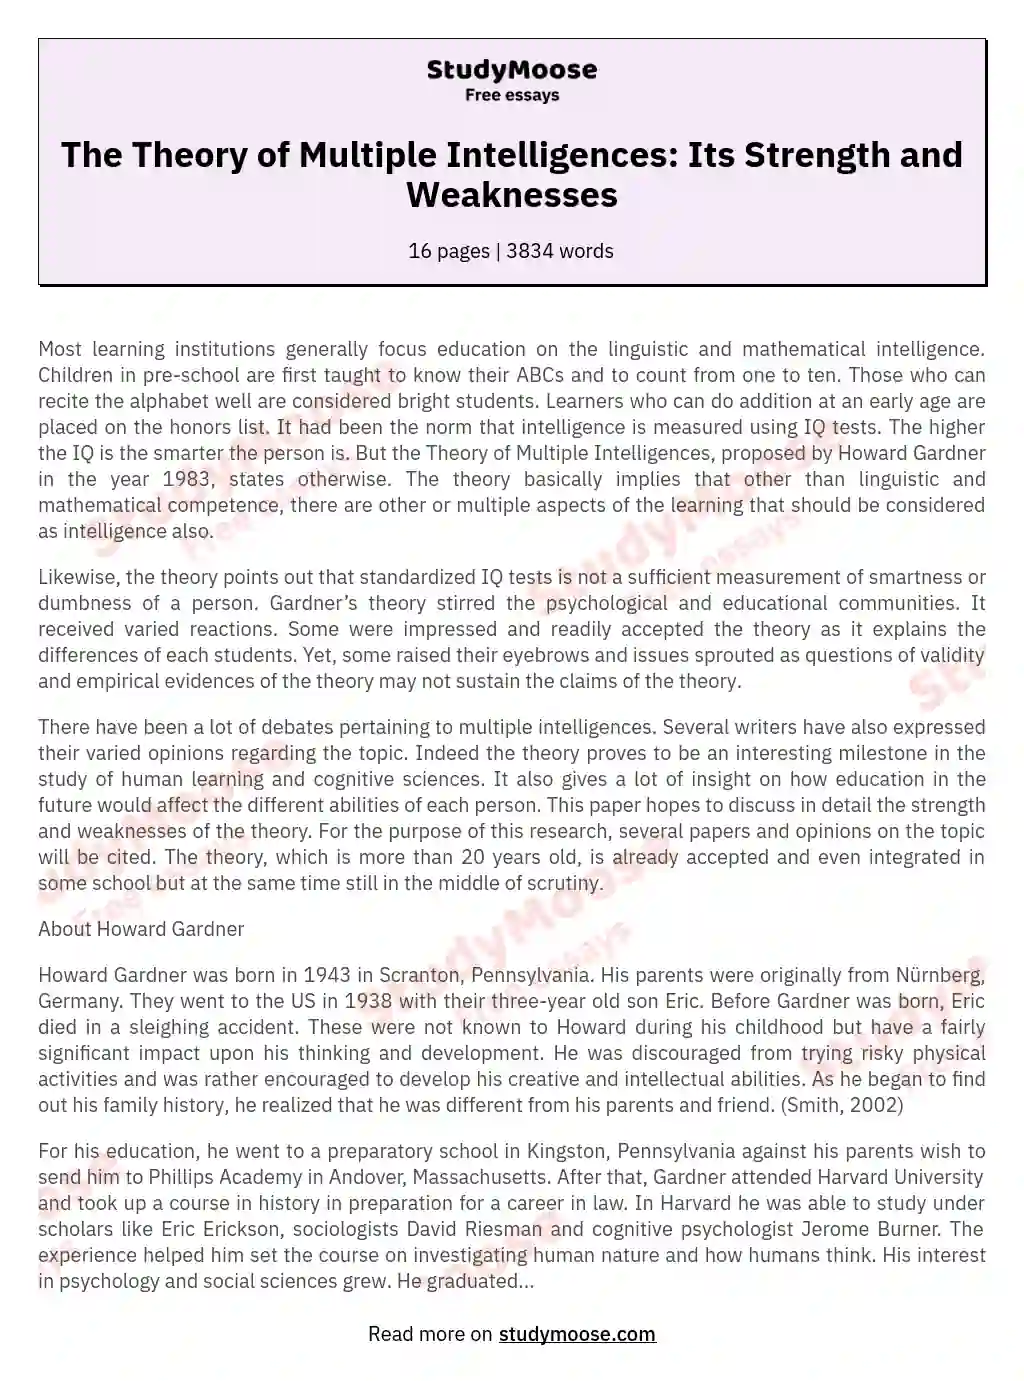 The Theory of Multiple Intelligences: Its Strength and Weaknesses essay